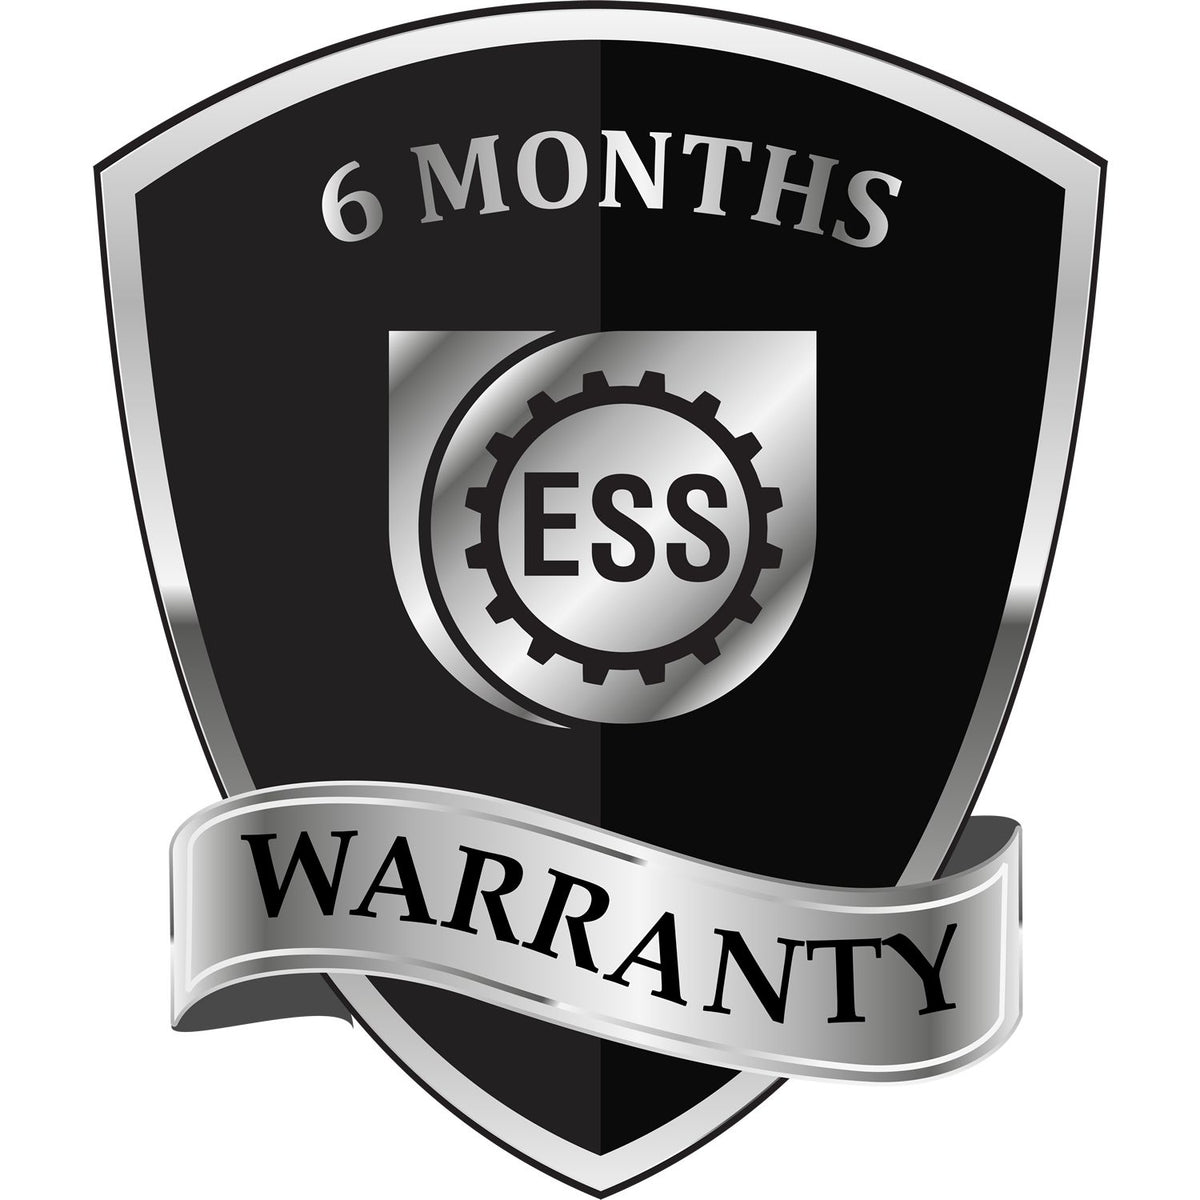 A badge or emblem showing a warranty icon for the Pennsylvania Professional Engineer Seal Stamp